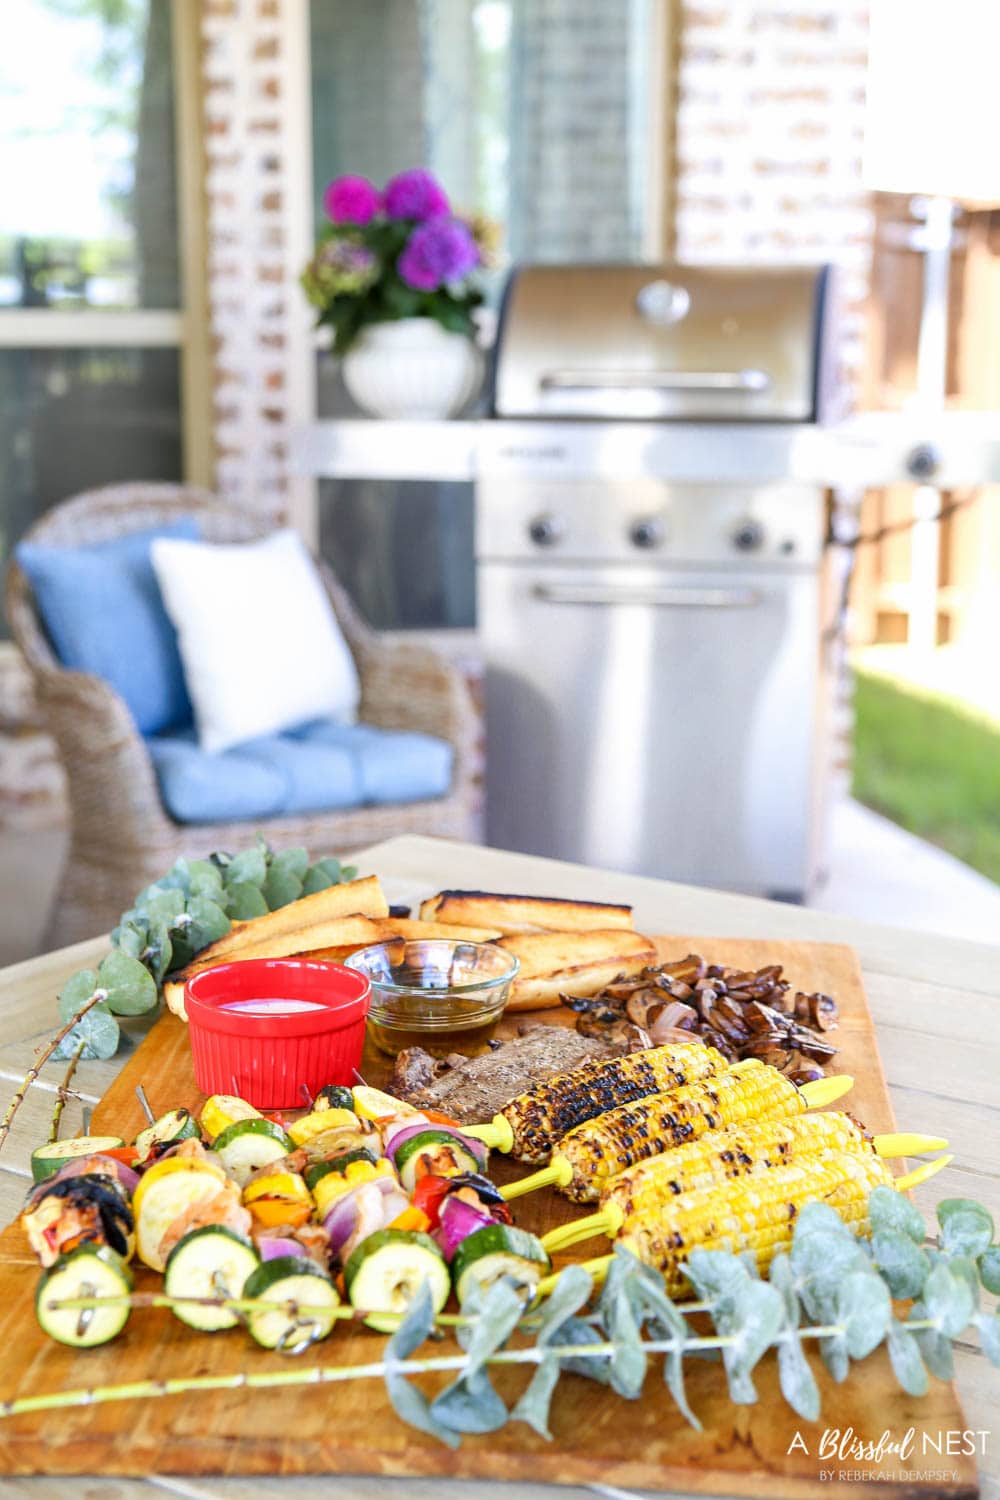 Turn your bbq and grilling recipes into a summer grilling charcuterie board! #ABlissfulNest #charcuterieboard #appetizers